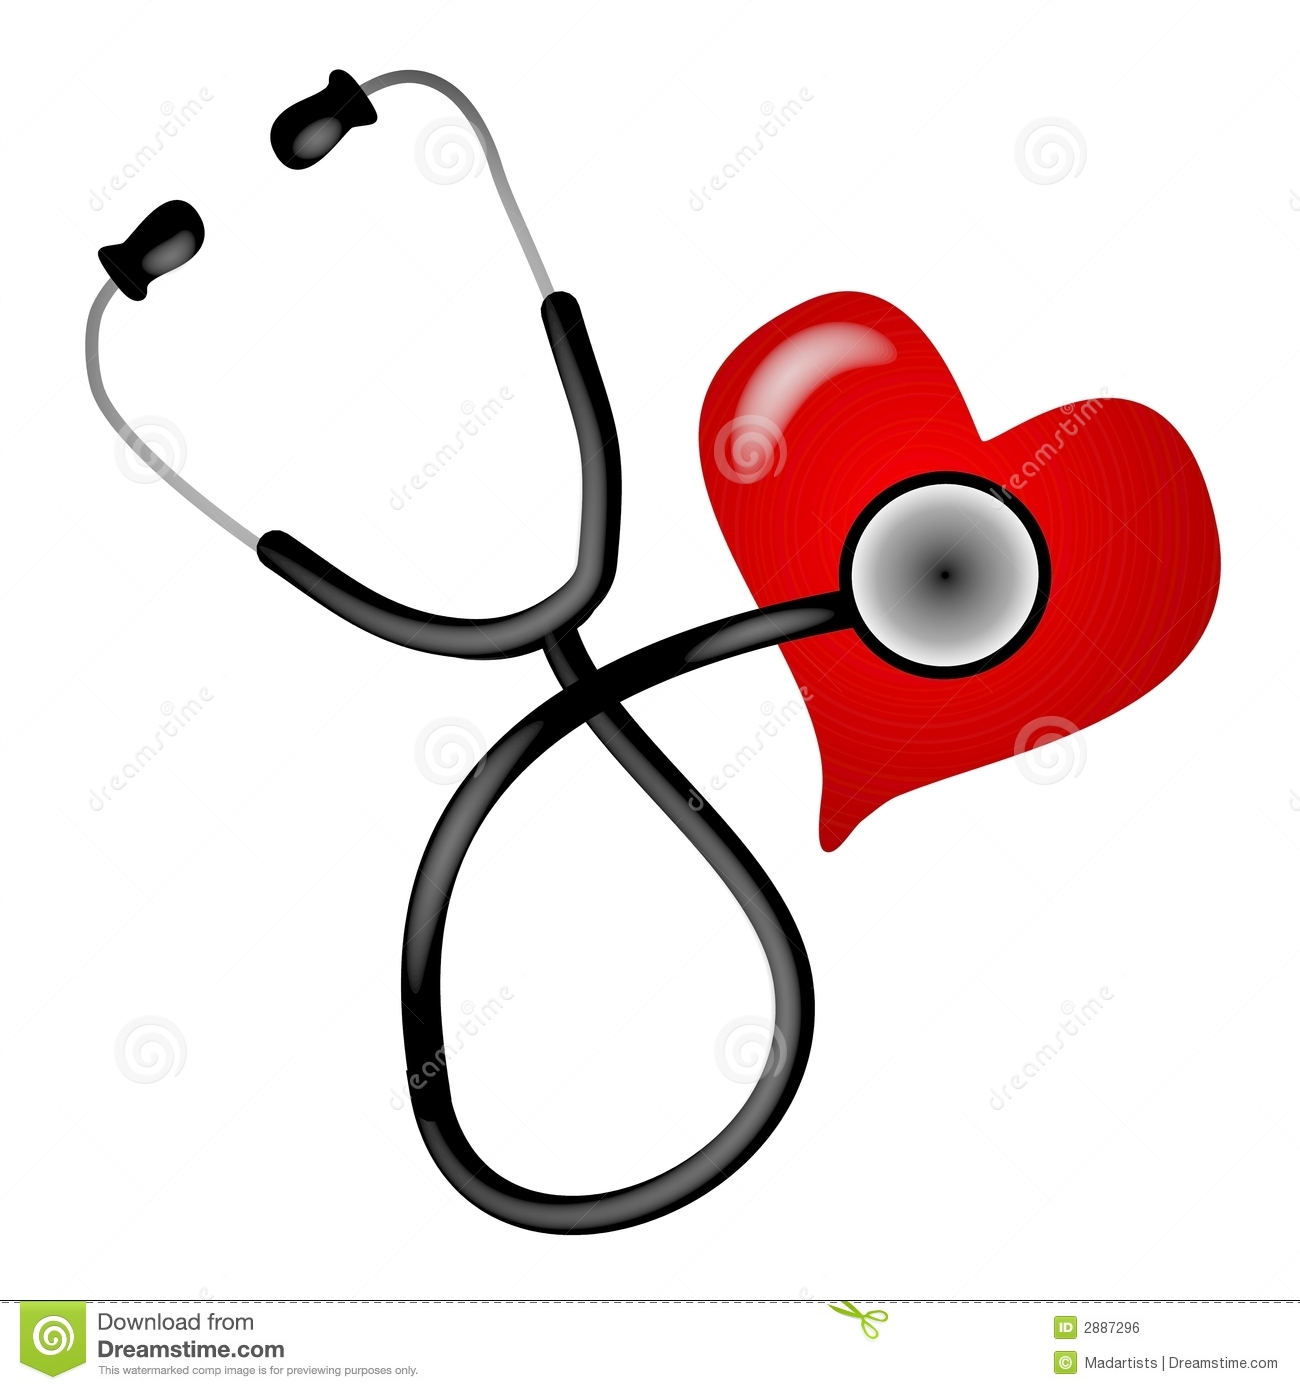 Stethoscope Clipart Free Clip - Stethoscope Clipart Free